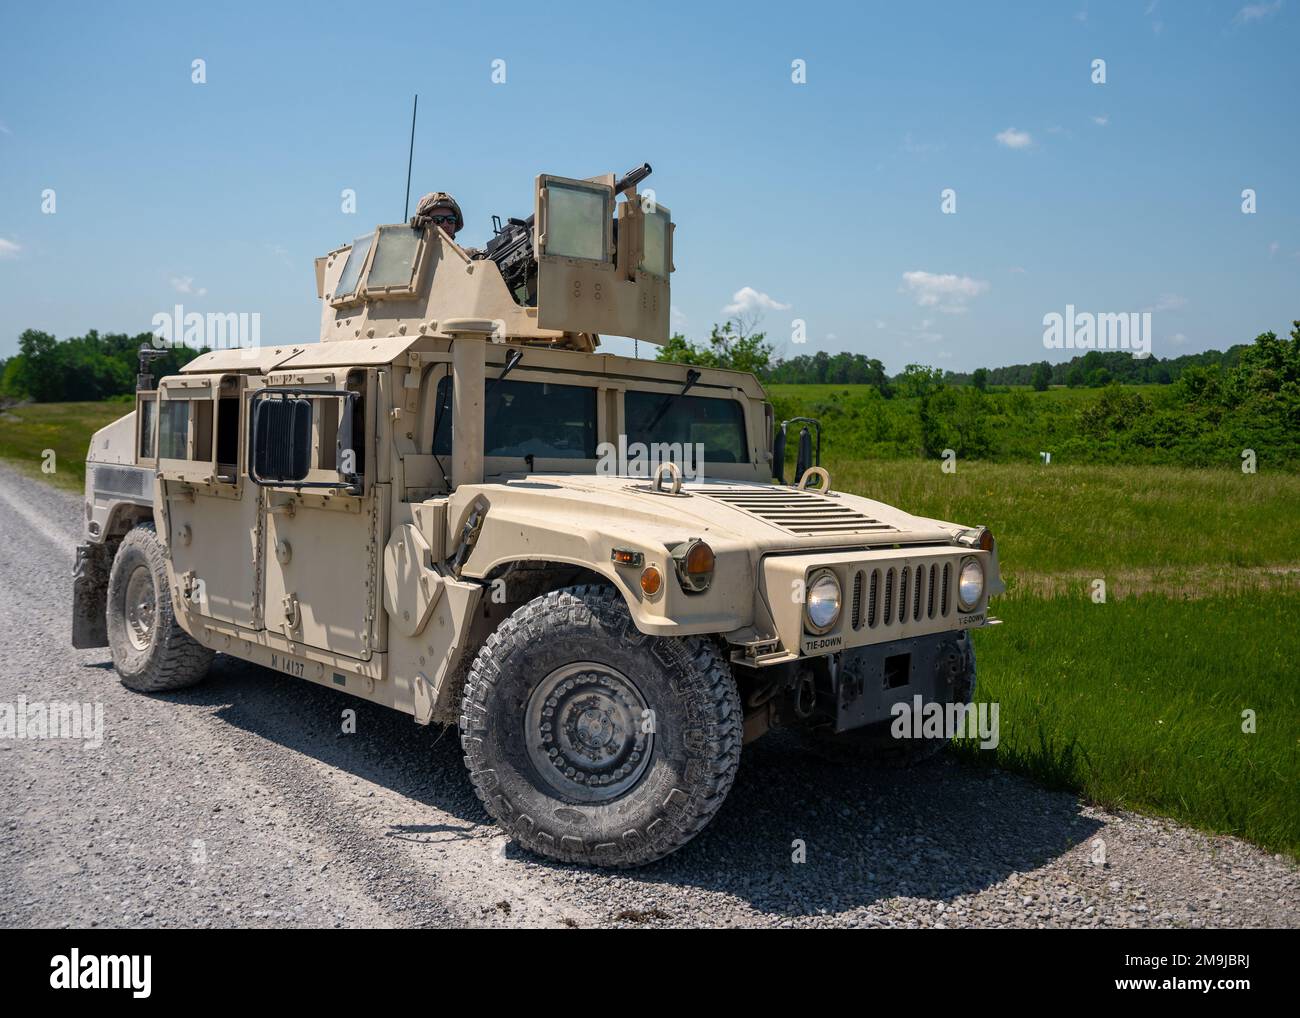 A U.S. Reserve Marine assigned to the Combined Anti-Armor Team, Weapons Company, 3rd Battalion, 23rd Marine Regiment, 4th Marine Division, secures a position with a MK19 40mm grenade machine gun mounted on a Humvee during a mission rehearsal exercise at Fort Campbell, Kentucky, May 19, 2022. Weapons Company convened with other units from 3/23 at Fort Campbell for a mission rehearsal exercise to prepare for the upcoming Integrated Training Exercise 4-22 in the summer of 2022. The Combined Anti-Armor Team Marines conducted machine gun ranges and convoy operations with quick reaction drills. Stock Photo